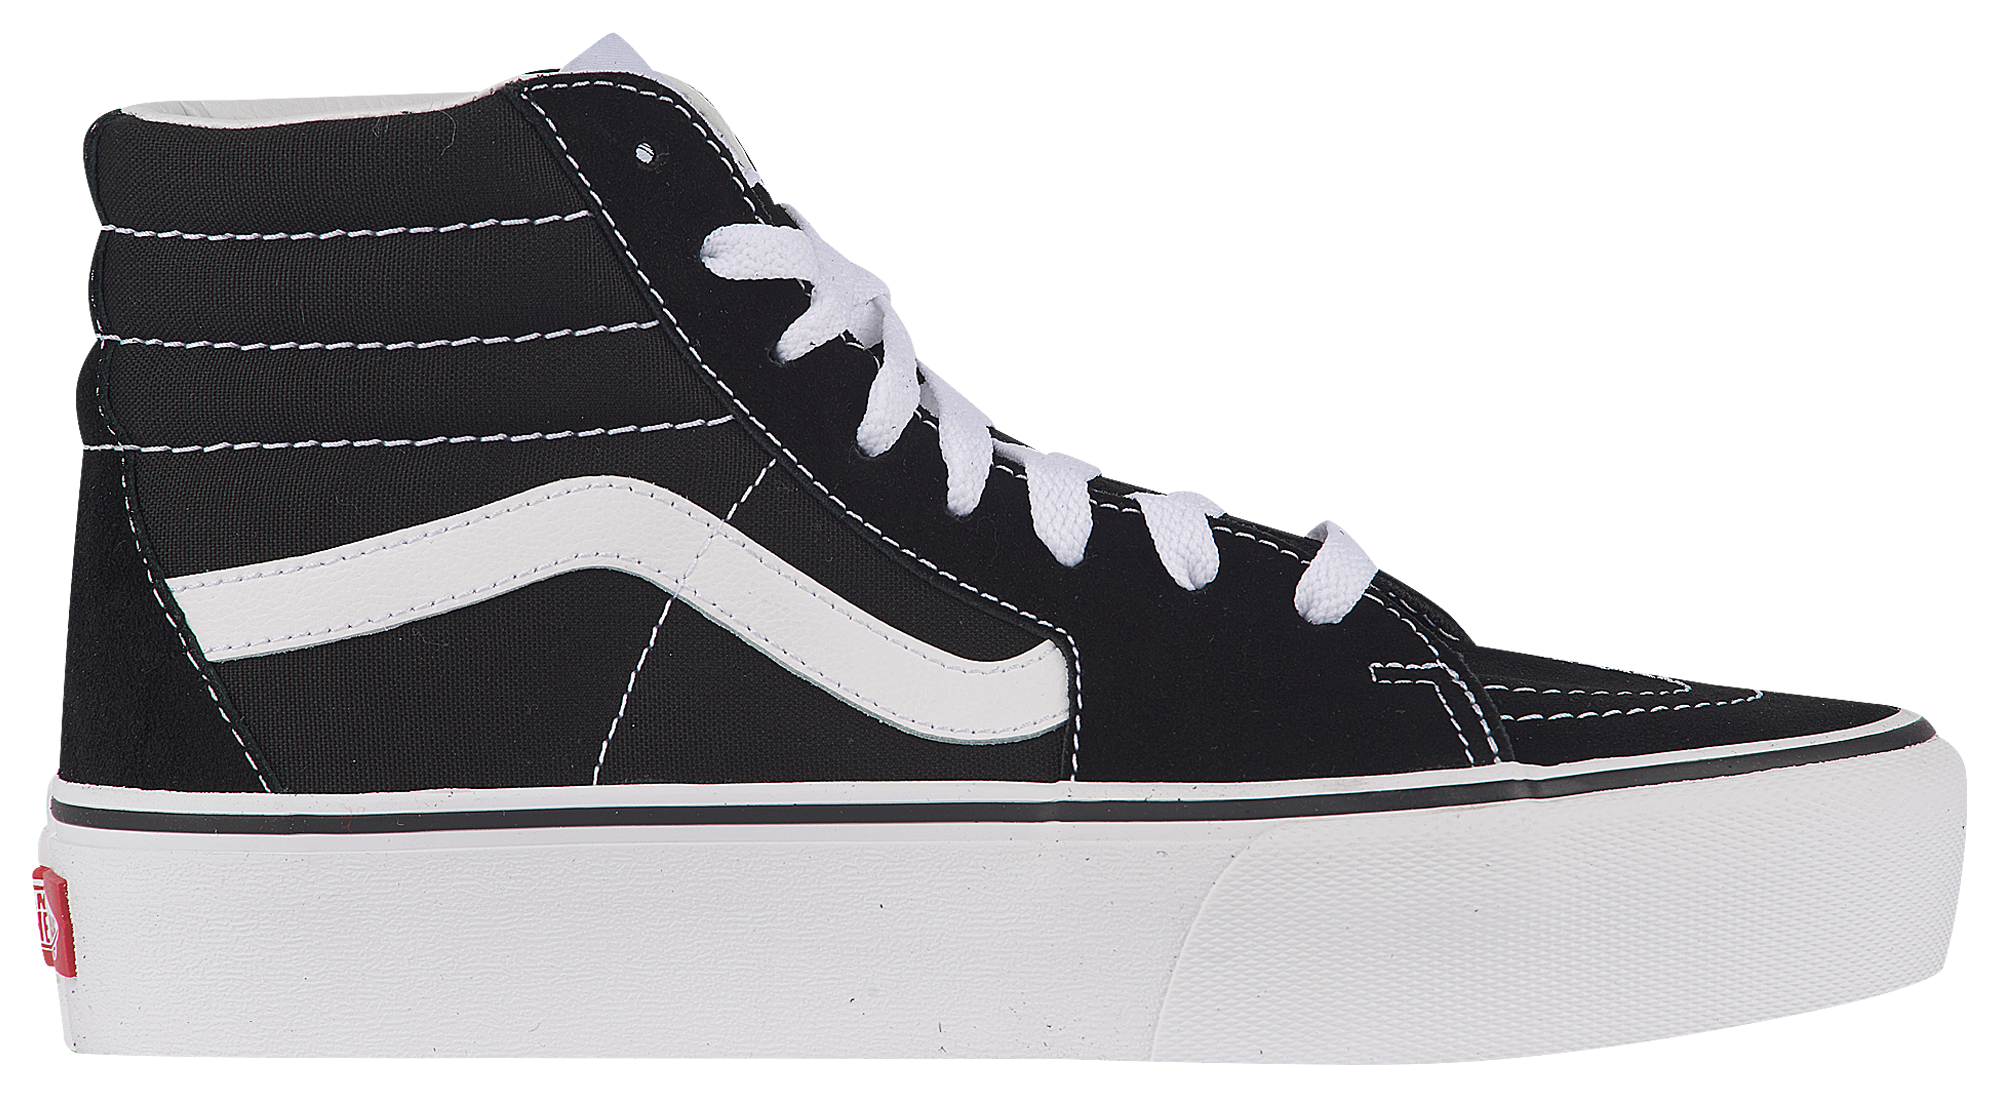 Asino legna guardiano vans shoes price 